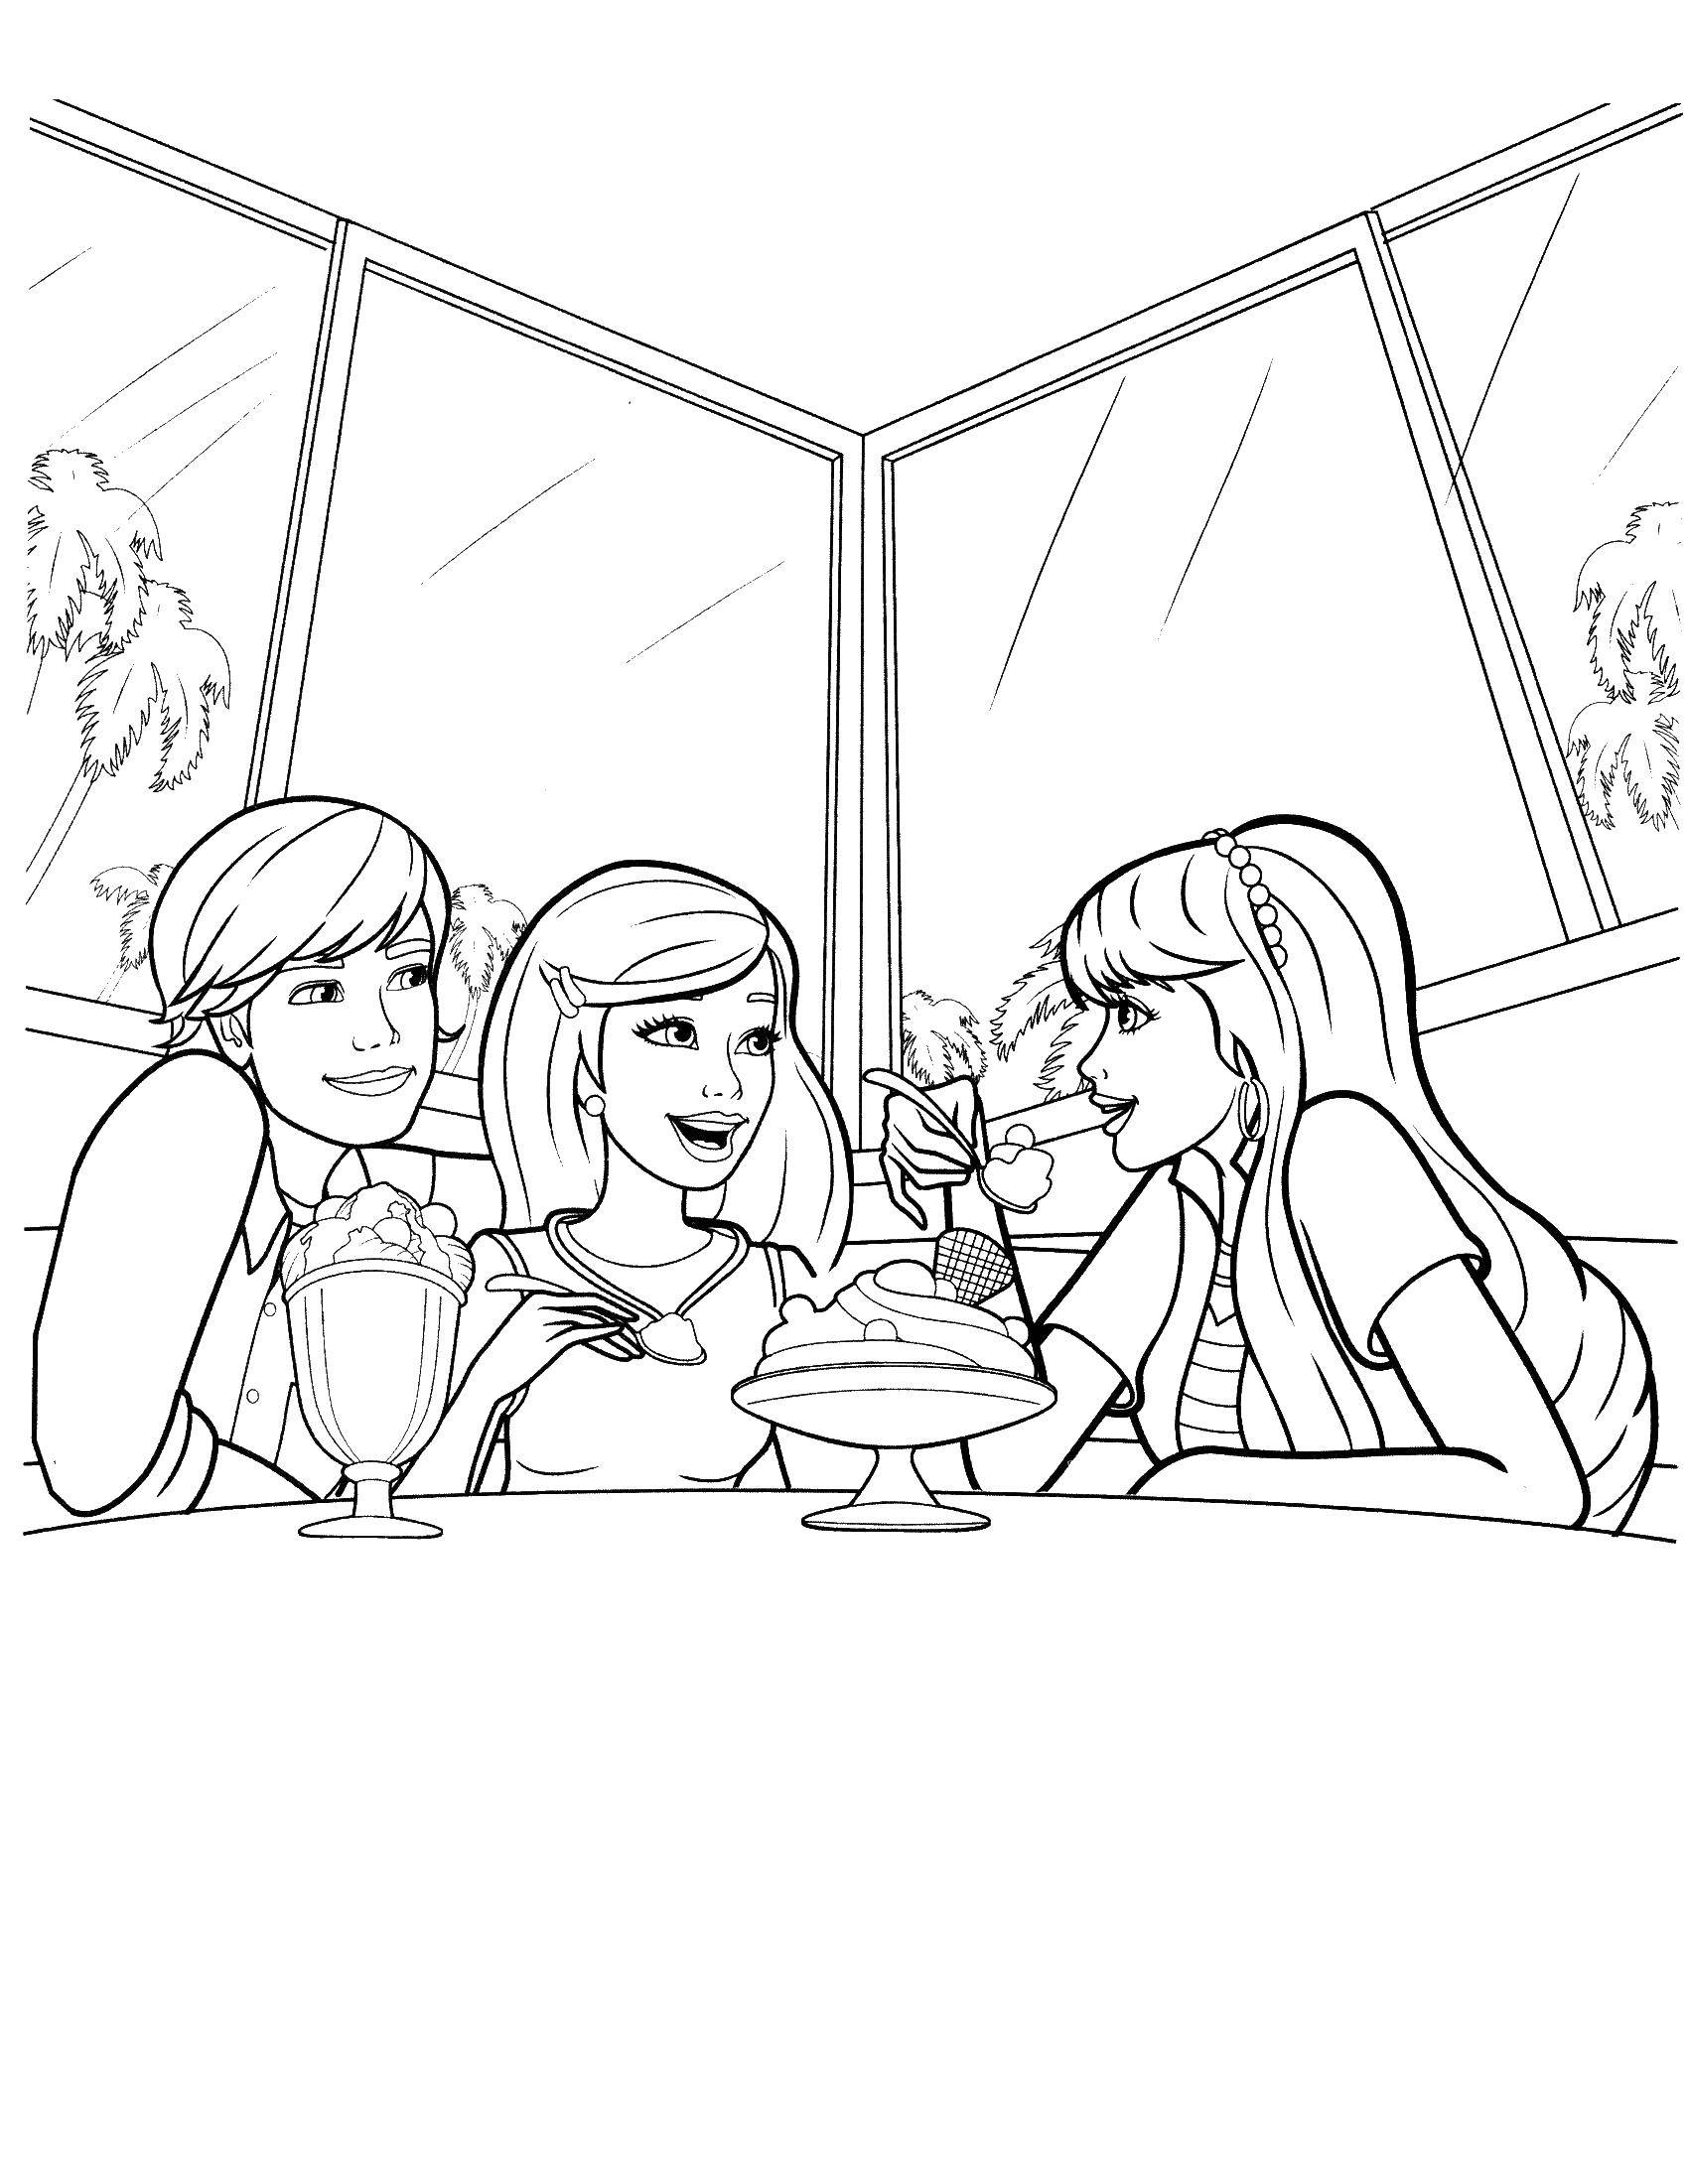 Coloring Barbie and her friends. Category ladies. Tags:  Barbie , model, friends.